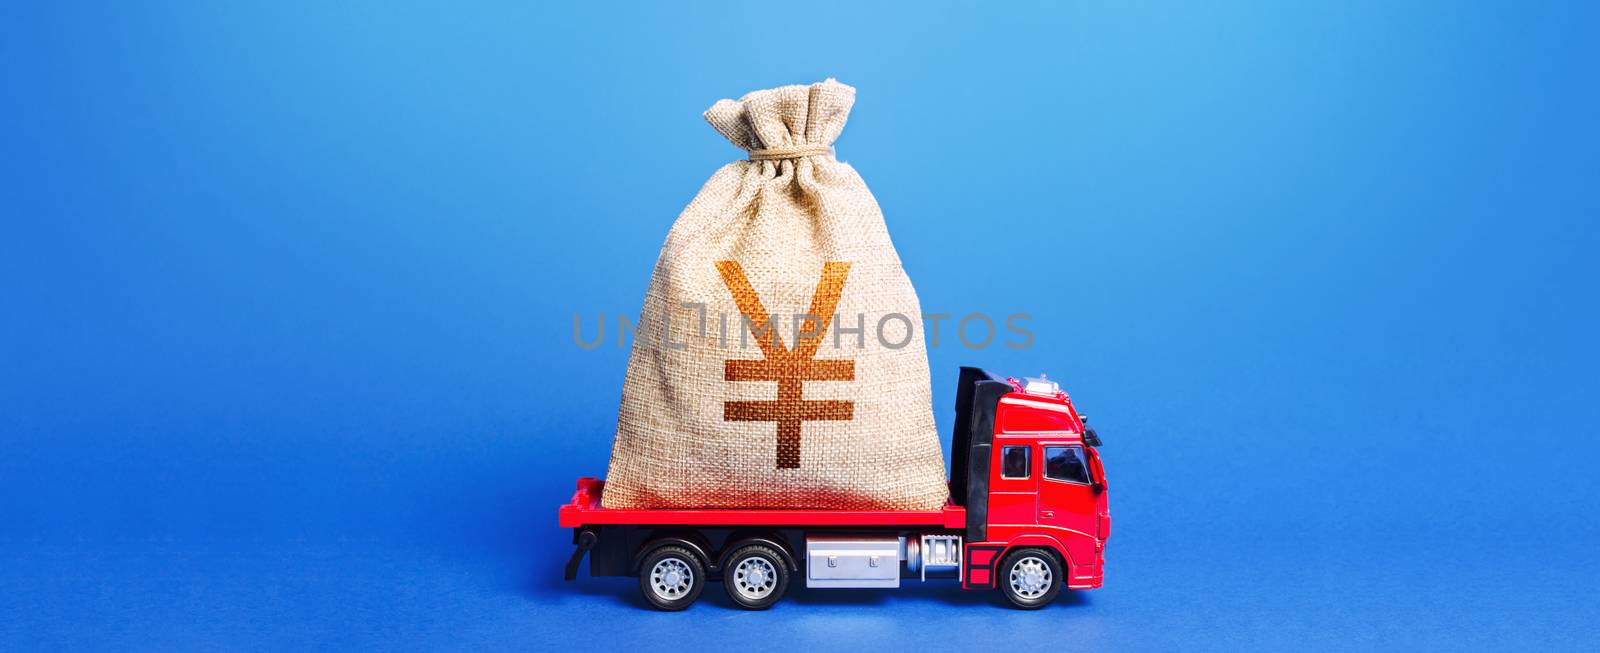 The truck is carrying a huge Yen Yuan money bag. Great investment. Anti-crisis measures of government. Attracting large funds to the economy for subsidies, support and cheap soft loans for businesses.